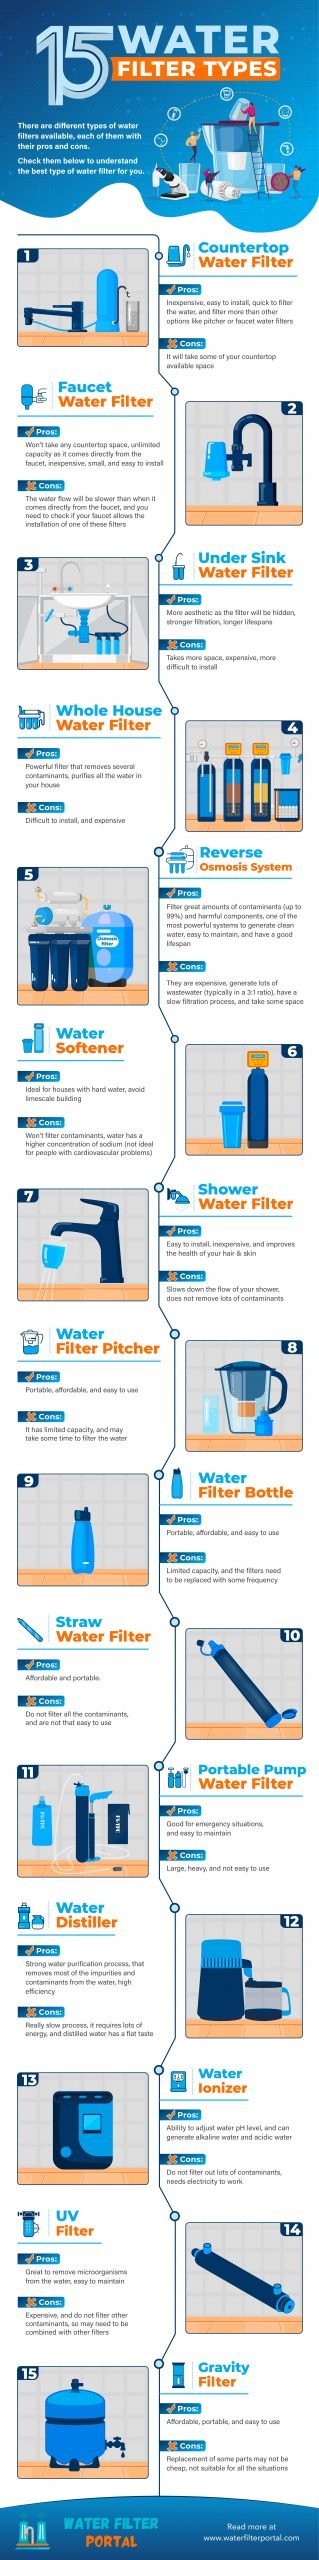 water-filter-types-infographic